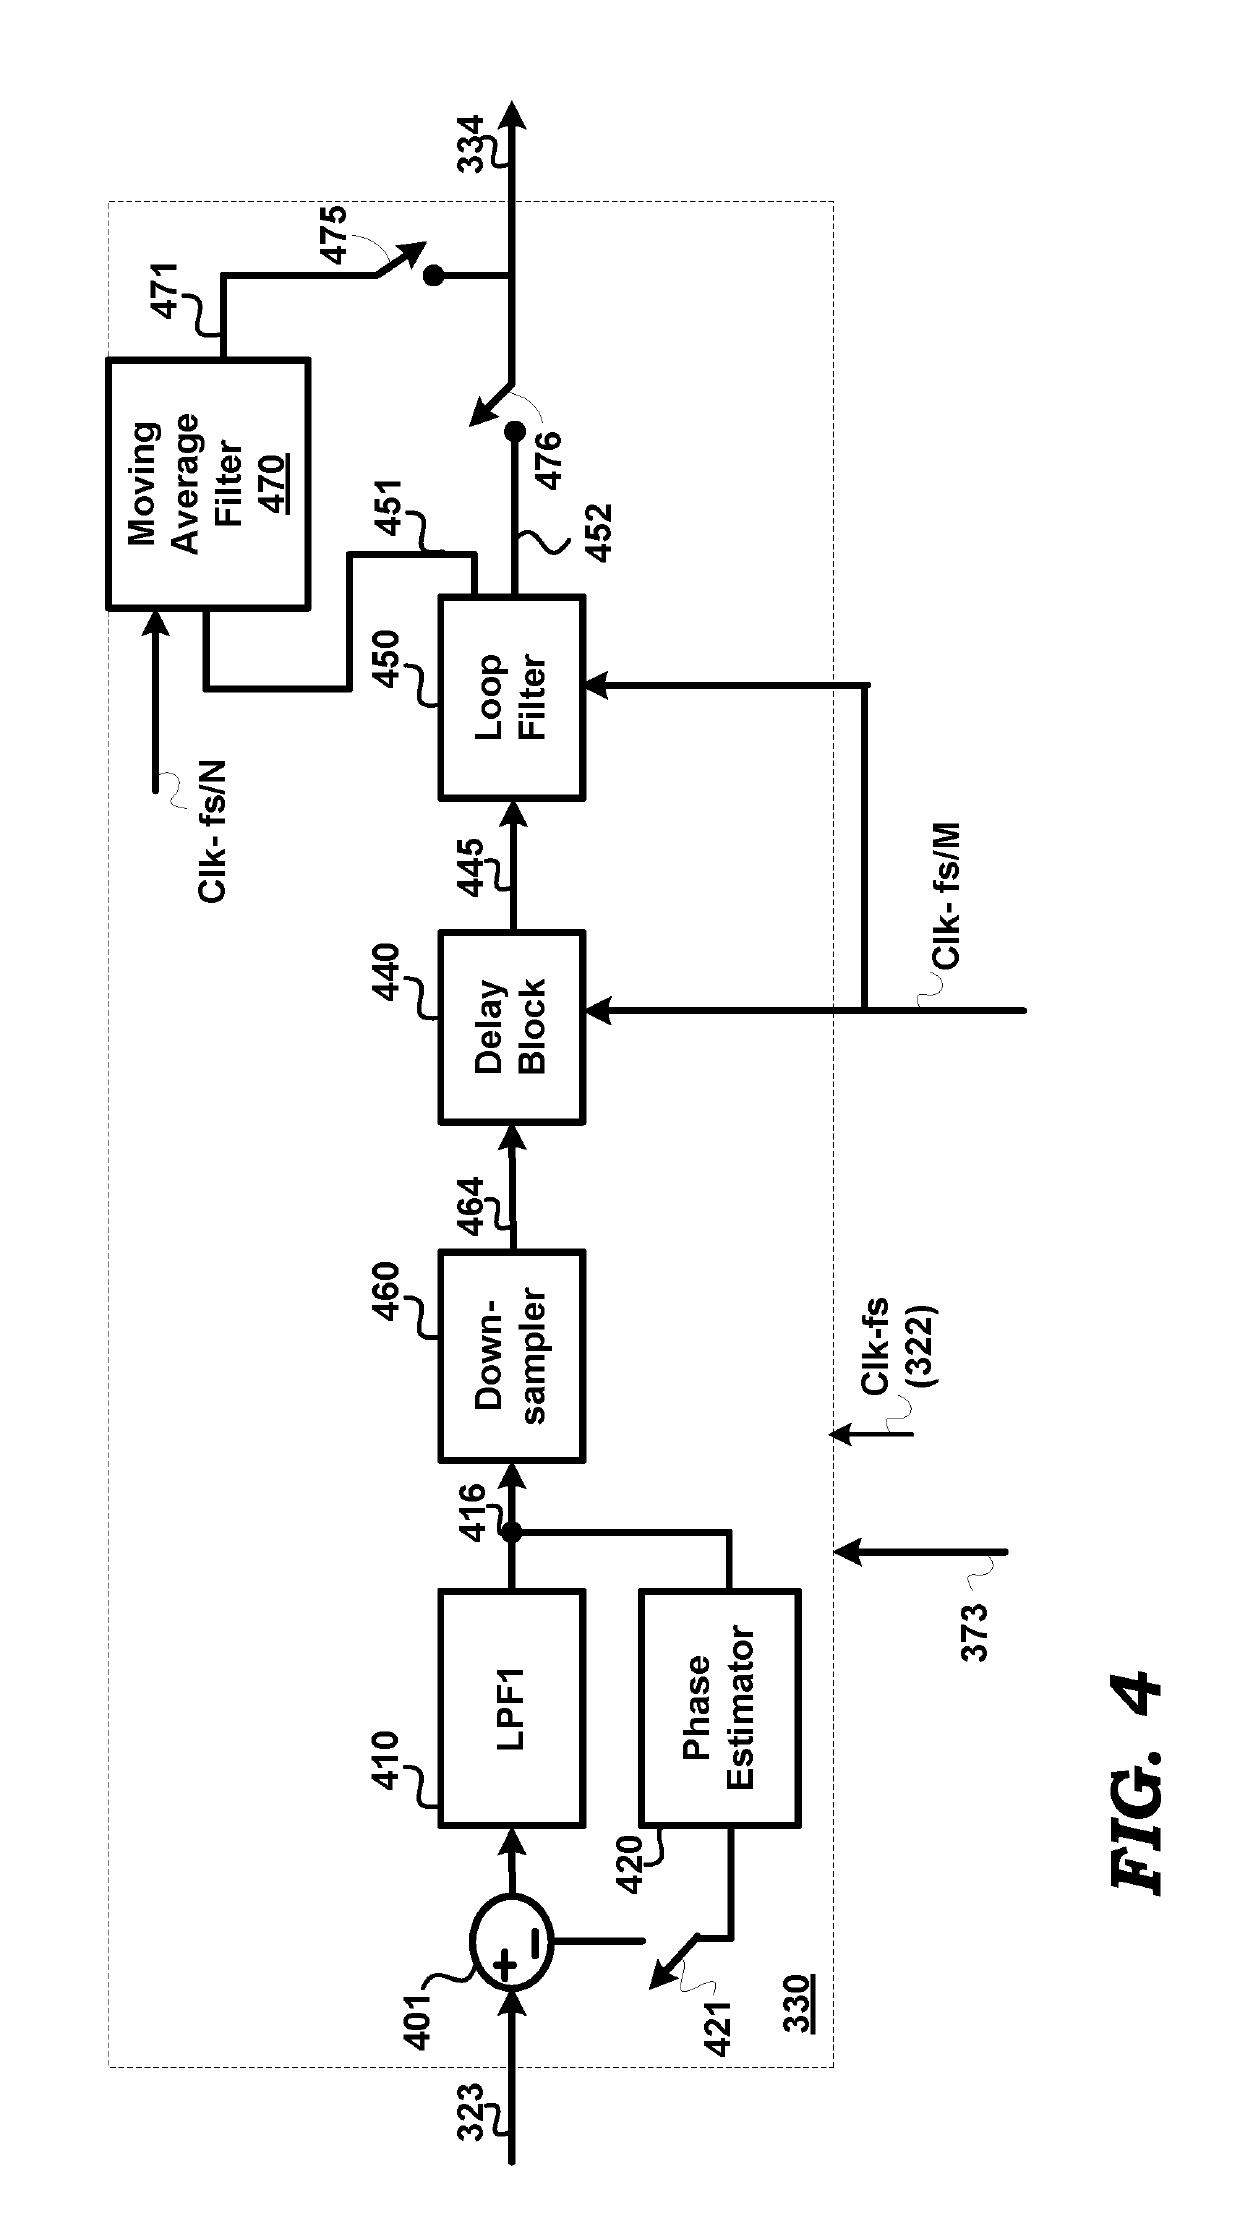 Hitless switching when generating an output clock derived from multiple redundant input clocks